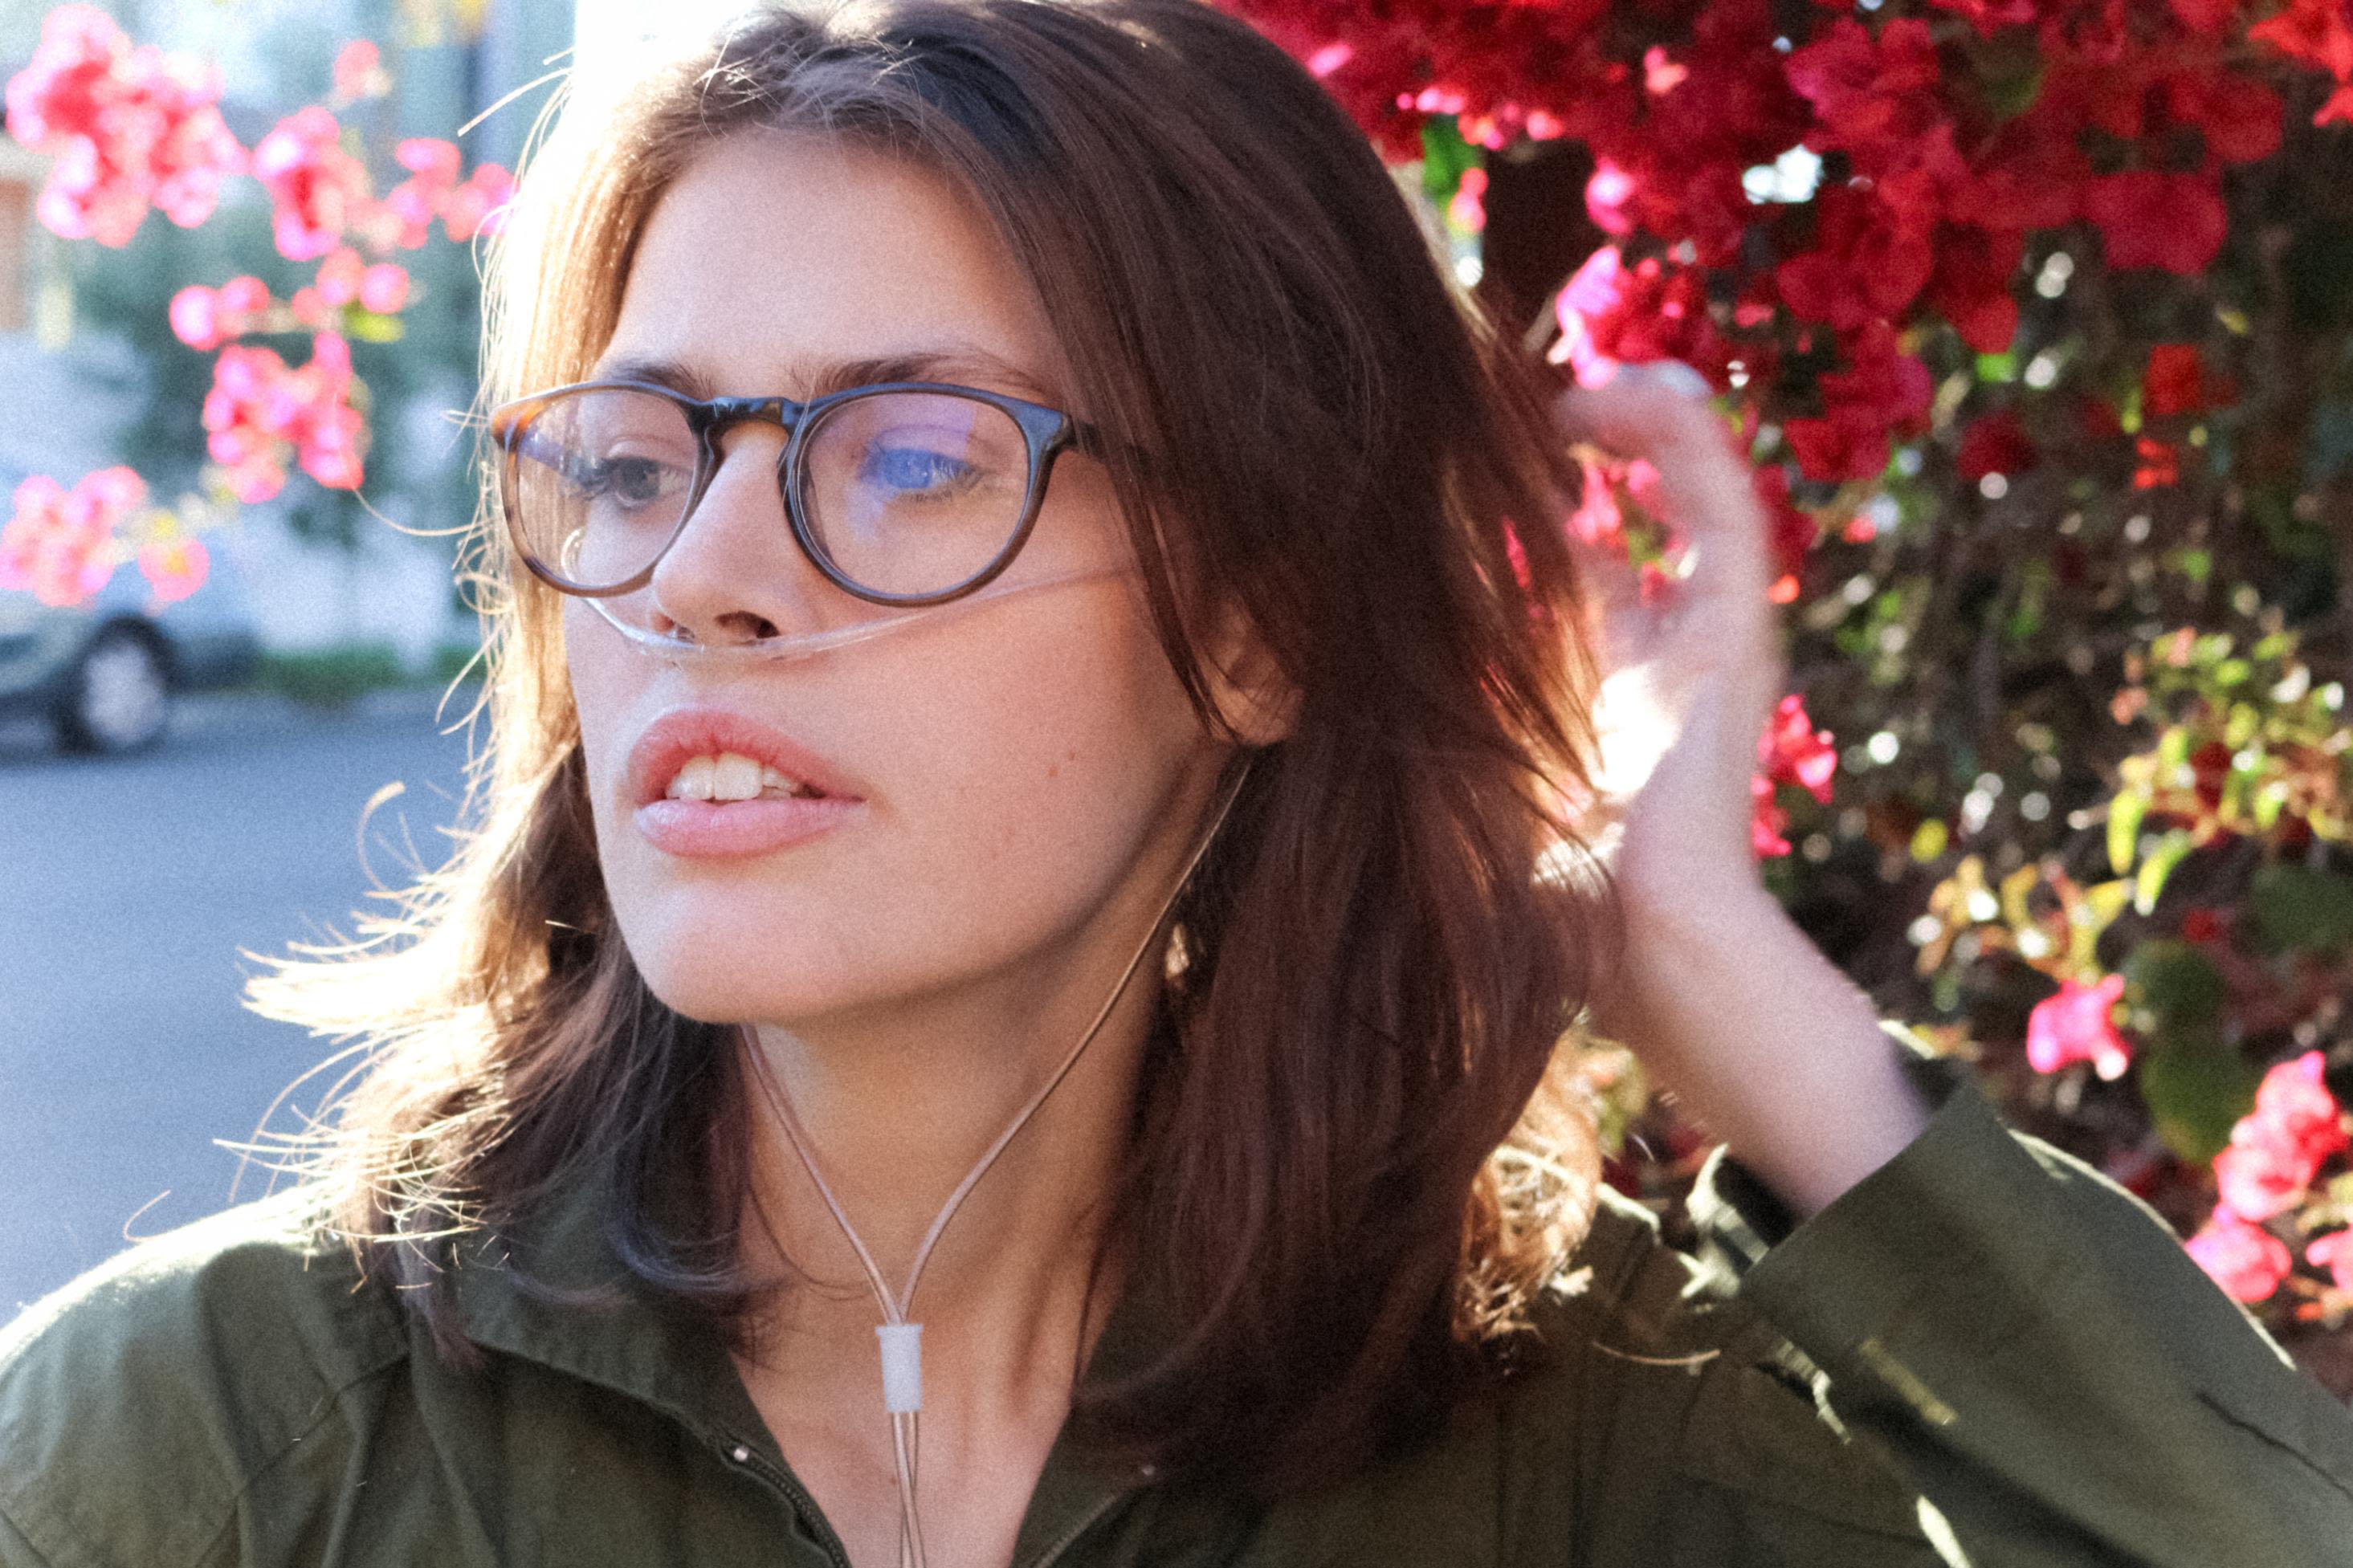 Claire Wineland, inspirational speaker and social media star, dies one week  after lung transplant